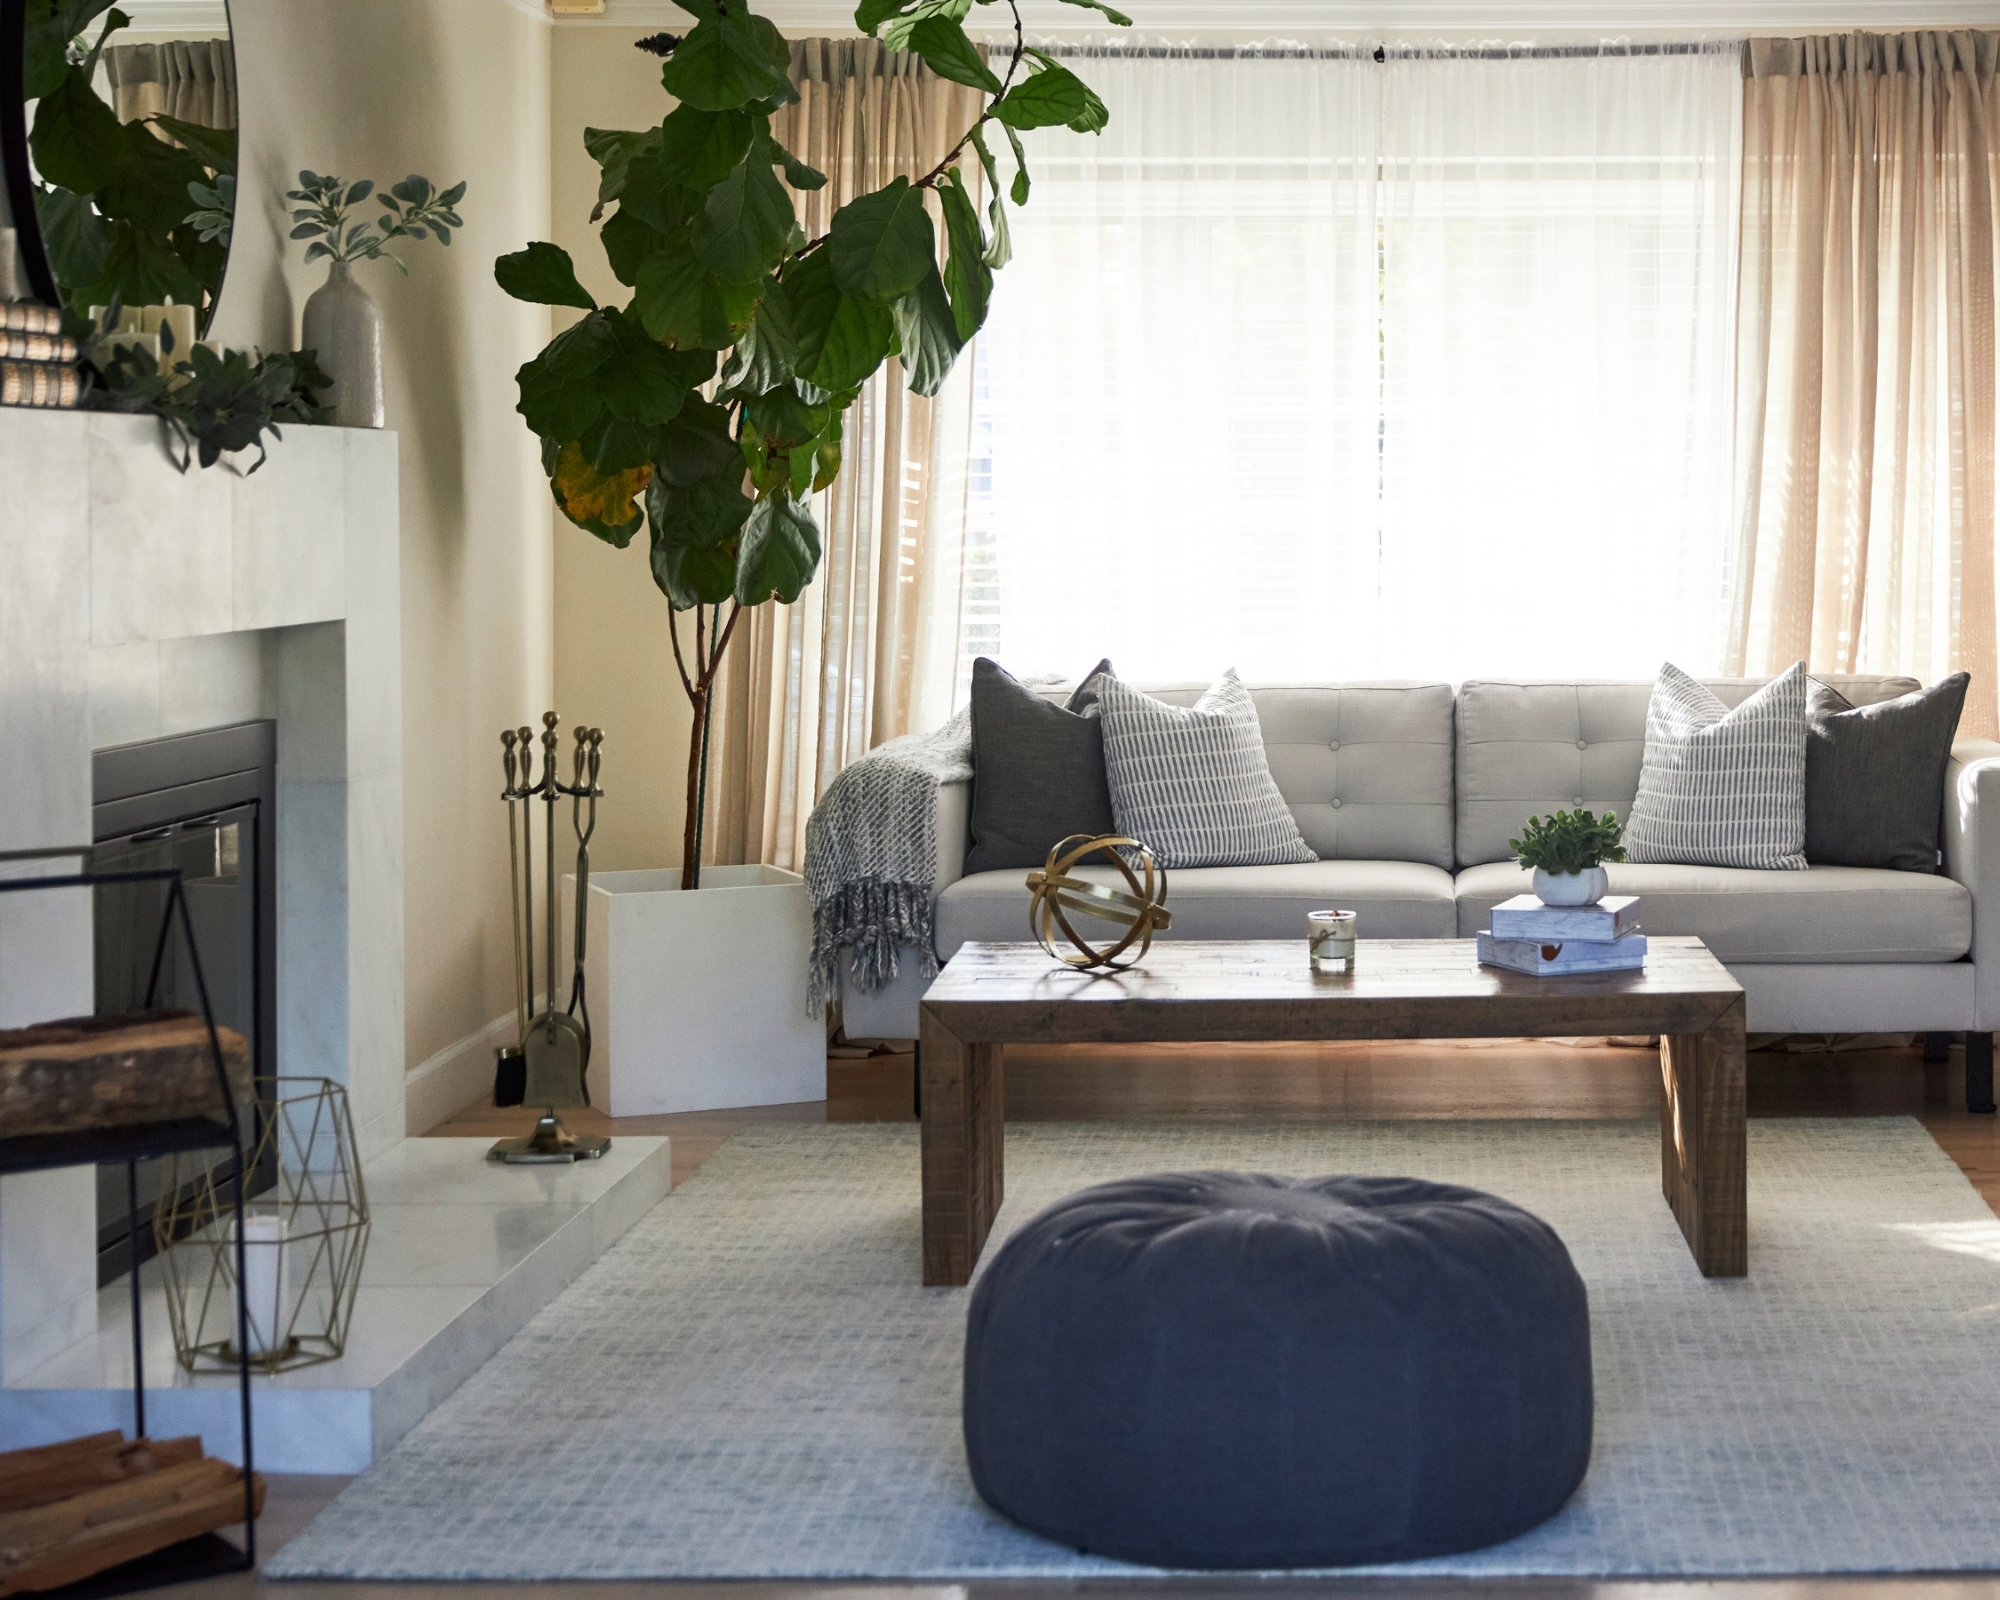 Modern bright living room with sofa, big plant, and light from window